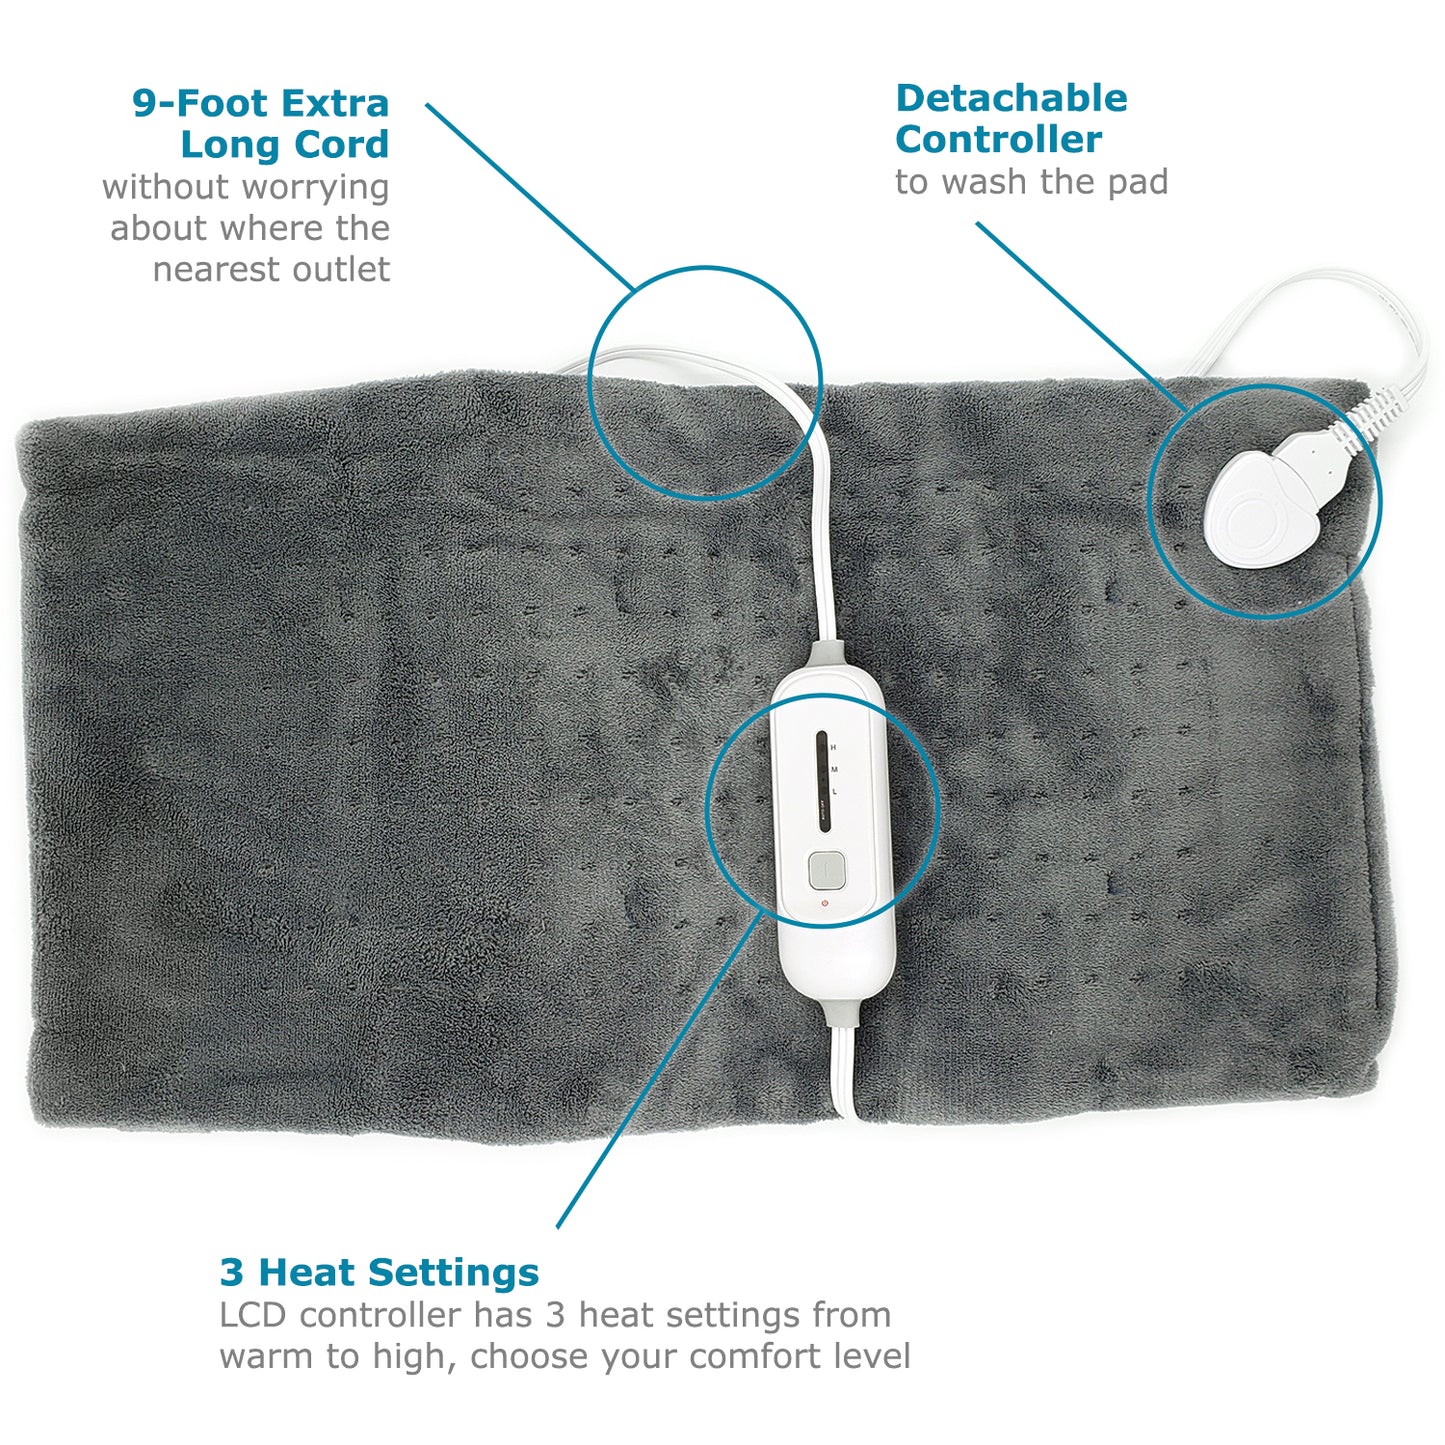 Dr Relief by SUNAID Full Back Heating Pad Fast Heating Wrap with Auto Shut Off for Back, Neck and Shoulder, Abdomen, Waist Pain Relief, Dry/Moist Option (12"x24", Gray)